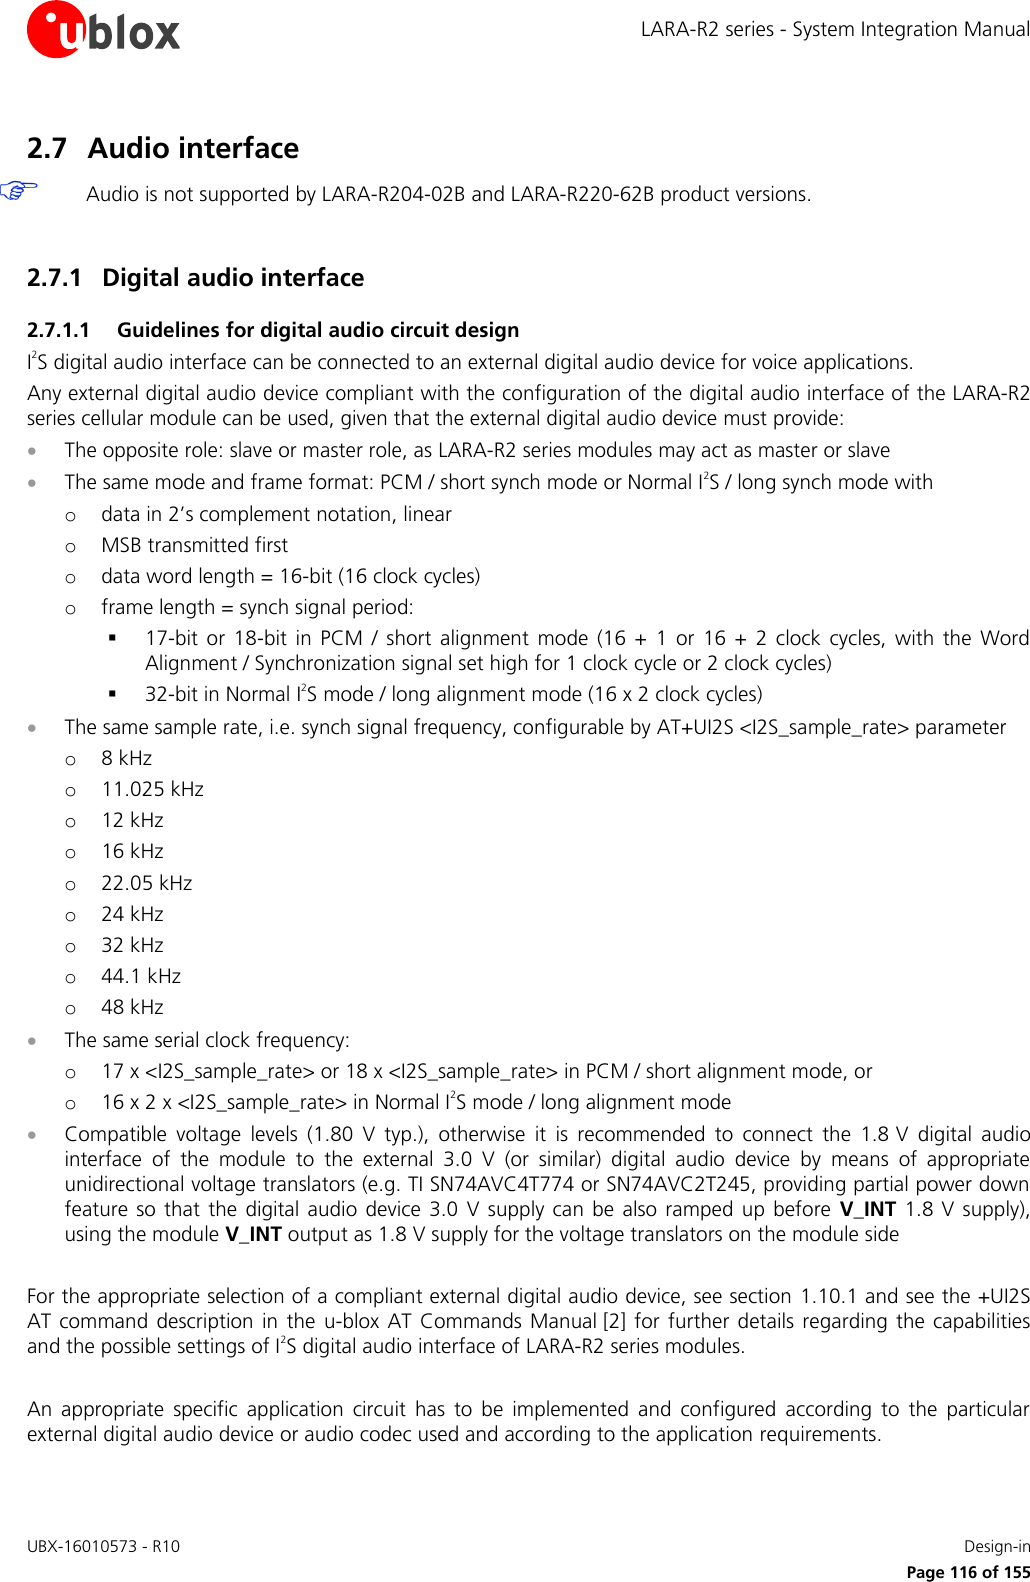 LARA-R2 series - System Integration Manual UBX-16010573 - R10    Design-in     Page 116 of 155 2.7 Audio interface  Audio is not supported by LARA-R204-02B and LARA-R220-62B product versions.  2.7.1 Digital audio interface 2.7.1.1 Guidelines for digital audio circuit design I2S digital audio interface can be connected to an external digital audio device for voice applications.  Any external digital audio device compliant with the configuration of the digital audio interface of the LARA-R2 series cellular module can be used, given that the external digital audio device must provide:  The opposite role: slave or master role, as LARA-R2 series modules may act as master or slave  The same mode and frame format: PCM / short synch mode or Normal I2S / long synch mode with o data in 2’s complement notation, linear o MSB transmitted first o data word length = 16-bit (16 clock cycles) o frame length = synch signal period:  17-bit  or  18-bit  in  PCM  /  short  alignment  mode  (16  +  1  or  16  +  2  clock  cycles,  with  the  Word Alignment / Synchronization signal set high for 1 clock cycle or 2 clock cycles)  32-bit in Normal I2S mode / long alignment mode (16 x 2 clock cycles)  The same sample rate, i.e. synch signal frequency, configurable by AT+UI2S &lt;I2S_sample_rate&gt; parameter o 8 kHz o 11.025 kHz o 12 kHz o 16 kHz o 22.05 kHz o 24 kHz o 32 kHz o 44.1 kHz o 48 kHz  The same serial clock frequency: o 17 x &lt;I2S_sample_rate&gt; or 18 x &lt;I2S_sample_rate&gt; in PCM / short alignment mode, or  o 16 x 2 x &lt;I2S_sample_rate&gt; in Normal I2S mode / long alignment mode  Compatible  voltage  levels  (1.80  V  typ.),  otherwise  it  is  recommended  to  connect  the  1.8 V  digital  audio interface  of  the  module  to  the  external  3.0  V  (or  similar)  digital  audio  device  by  means  of  appropriate unidirectional voltage translators (e.g. TI SN74AVC4T774 or SN74AVC2T245, providing partial power down feature  so that  the  digital  audio device  3.0  V supply  can  be also ramped up  before  V_INT  1.8 V supply), using the module V_INT output as 1.8 V supply for the voltage translators on the module side   For the appropriate selection of a compliant external digital audio device, see section  1.10.1 and see the +UI2S AT command description  in  the  u-blox AT  Commands  Manual [2]  for further  details regarding  the capabilities and the possible settings of I2S digital audio interface of LARA-R2 series modules.  An  appropriate  specific  application  circuit  has  to  be  implemented  and  configured  according  to  the  particular external digital audio device or audio codec used and according to the application requirements.  